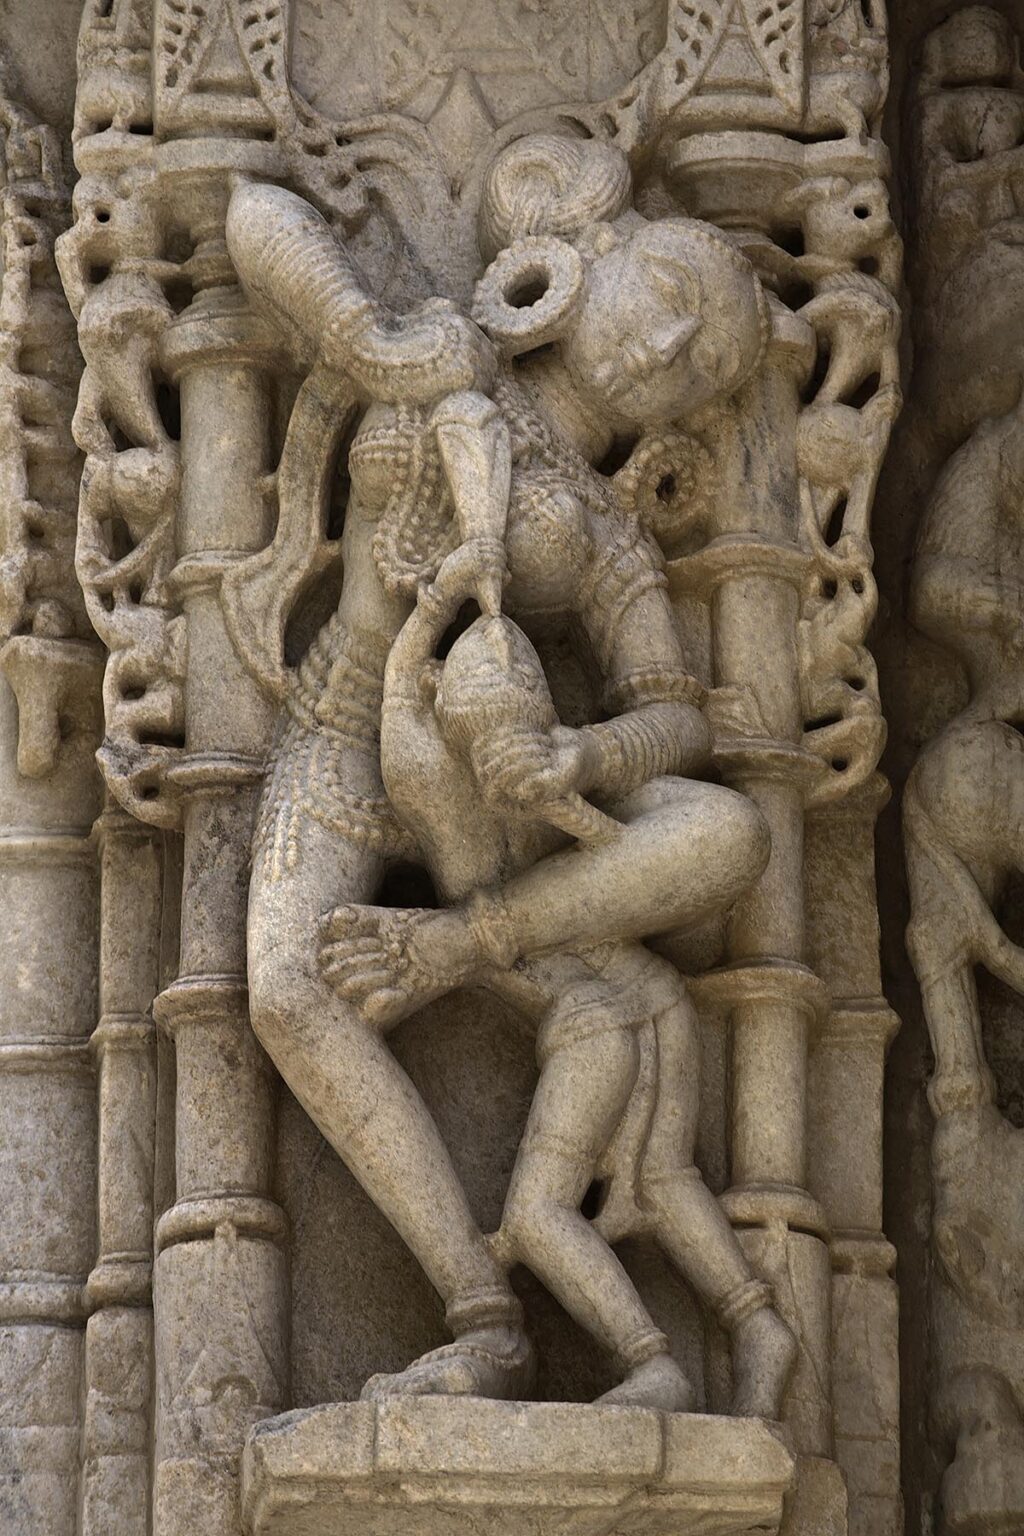 A CELESTIAL DEITY feeding her child at a JAIN TEMPLE at RANAKPUR is carved out of white marble in the Pali District of RAJASTHAN near Sadri - INDIA